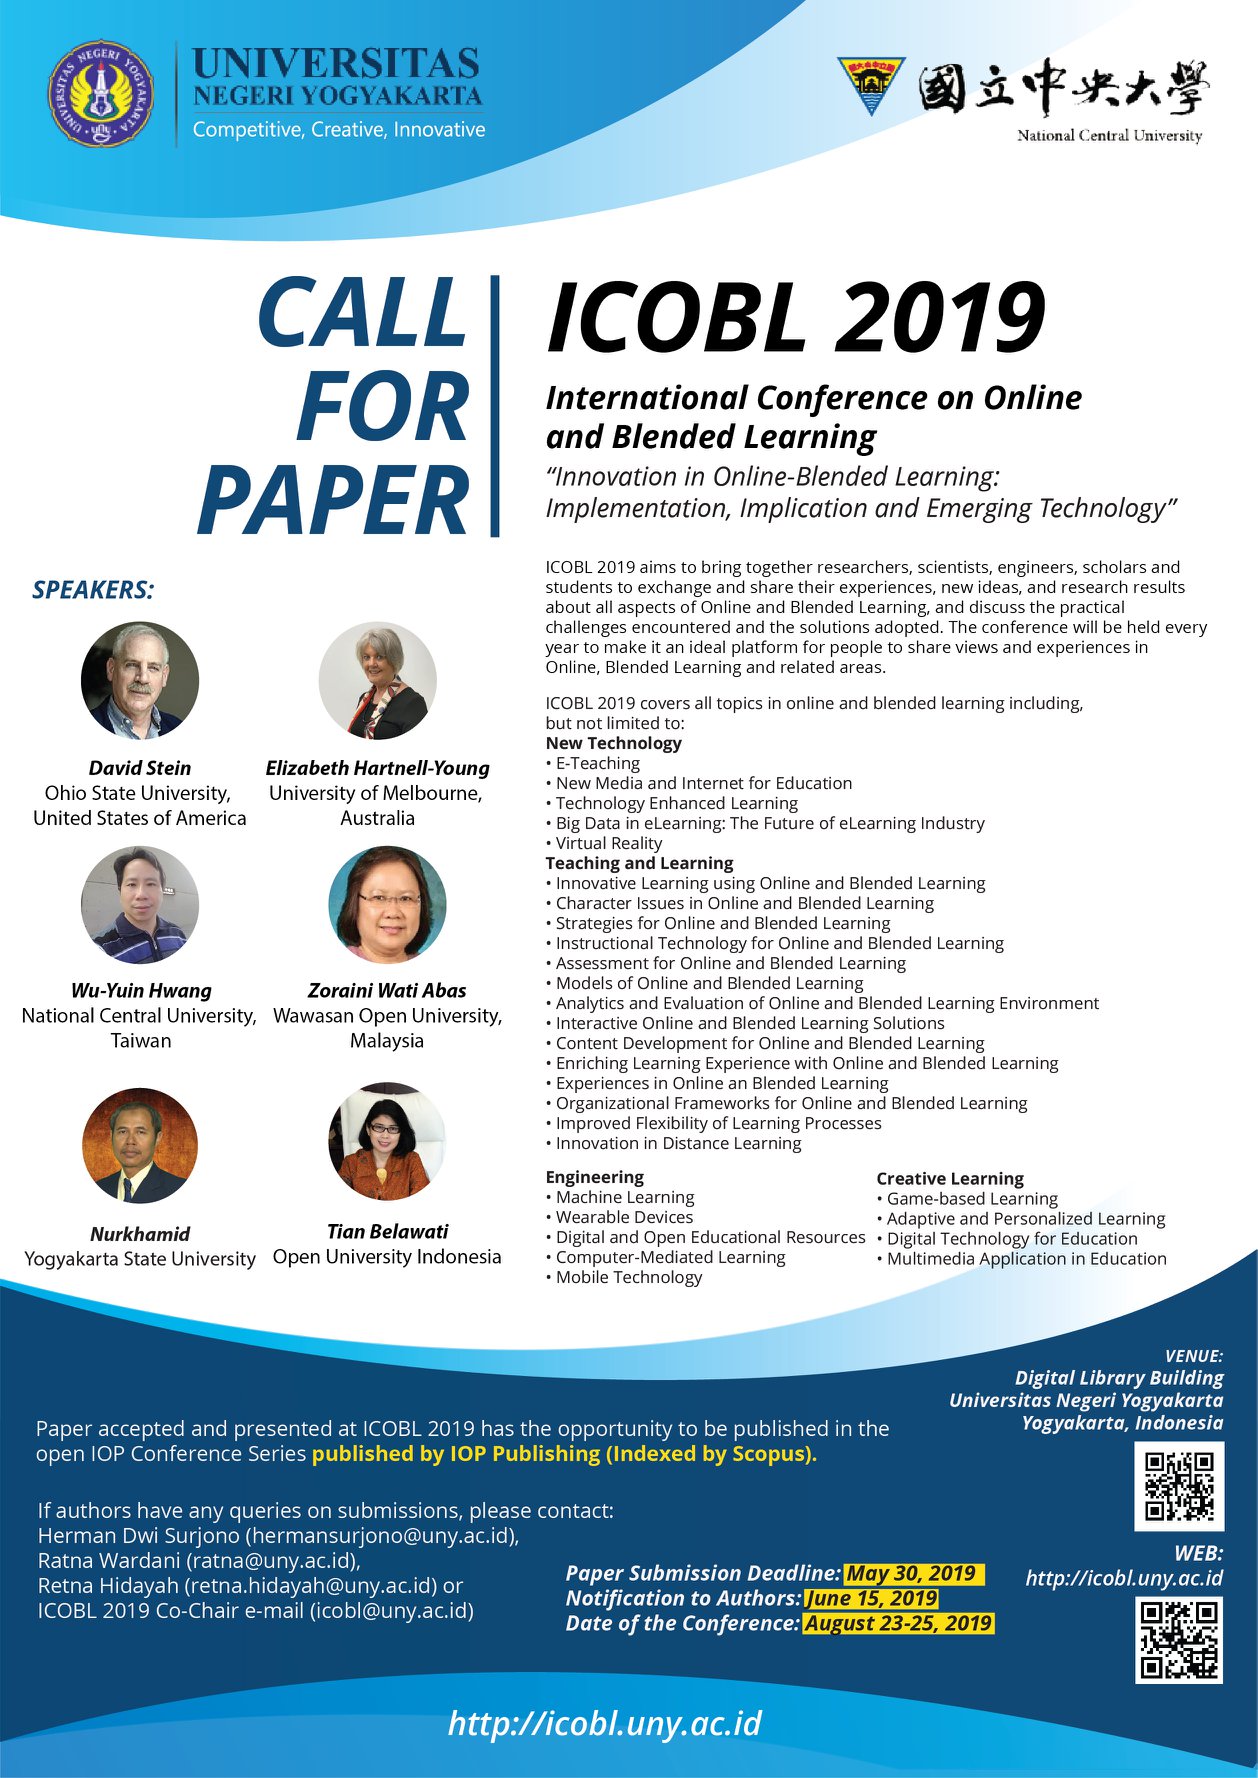 ICOBL 2019 – International Conference on Online and Blended Learning